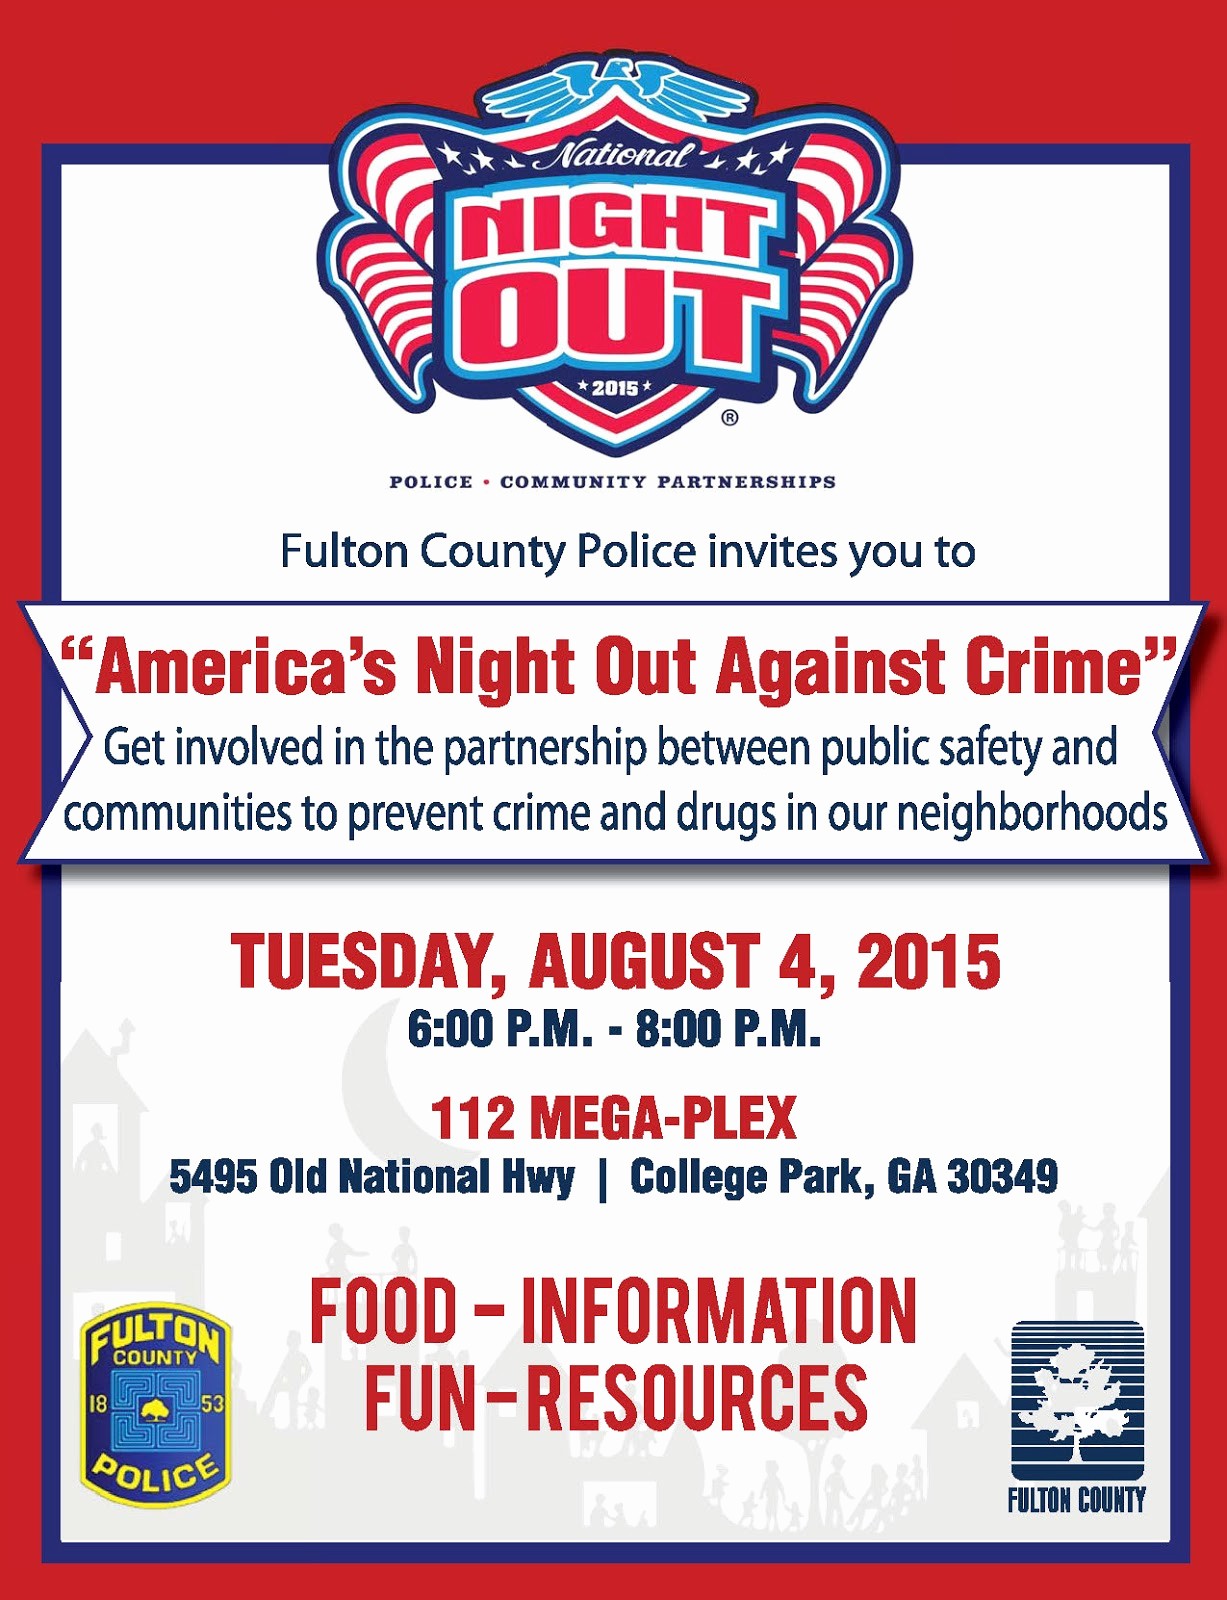 Parent Night Out Flyer Template Inspirational National Night Out Flyers Samples to Pin On